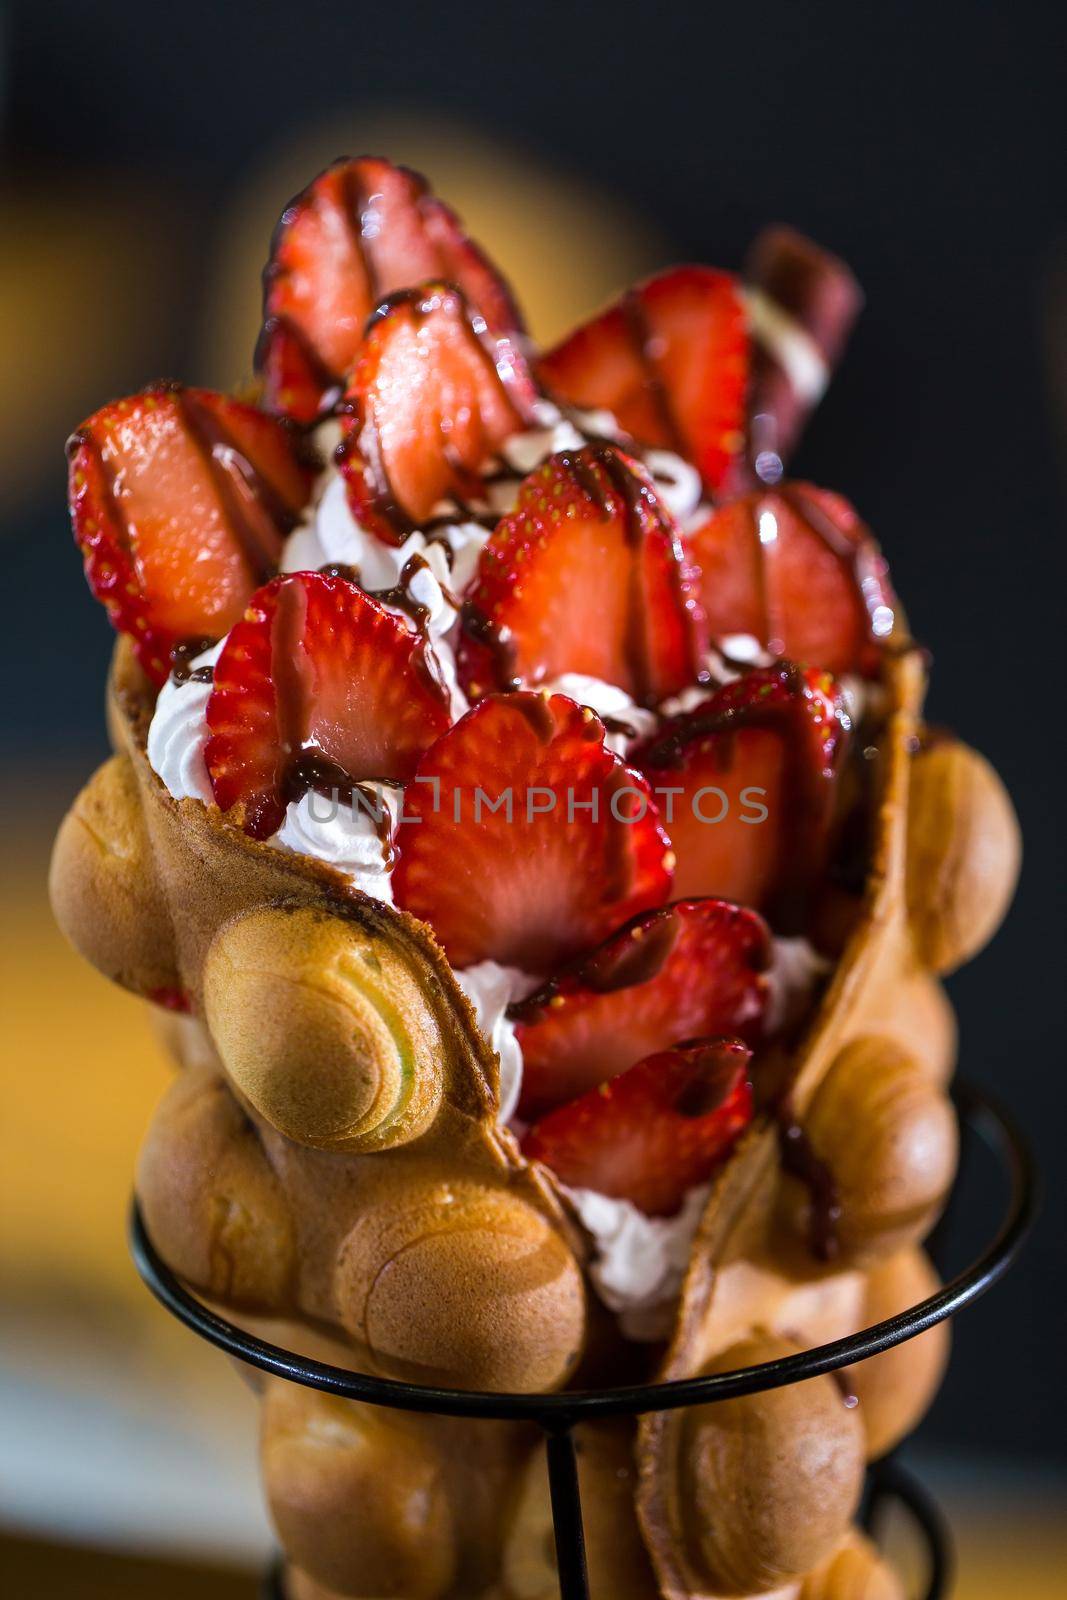 Hong Kong style egg waffle with strawberry. by StudioPeace